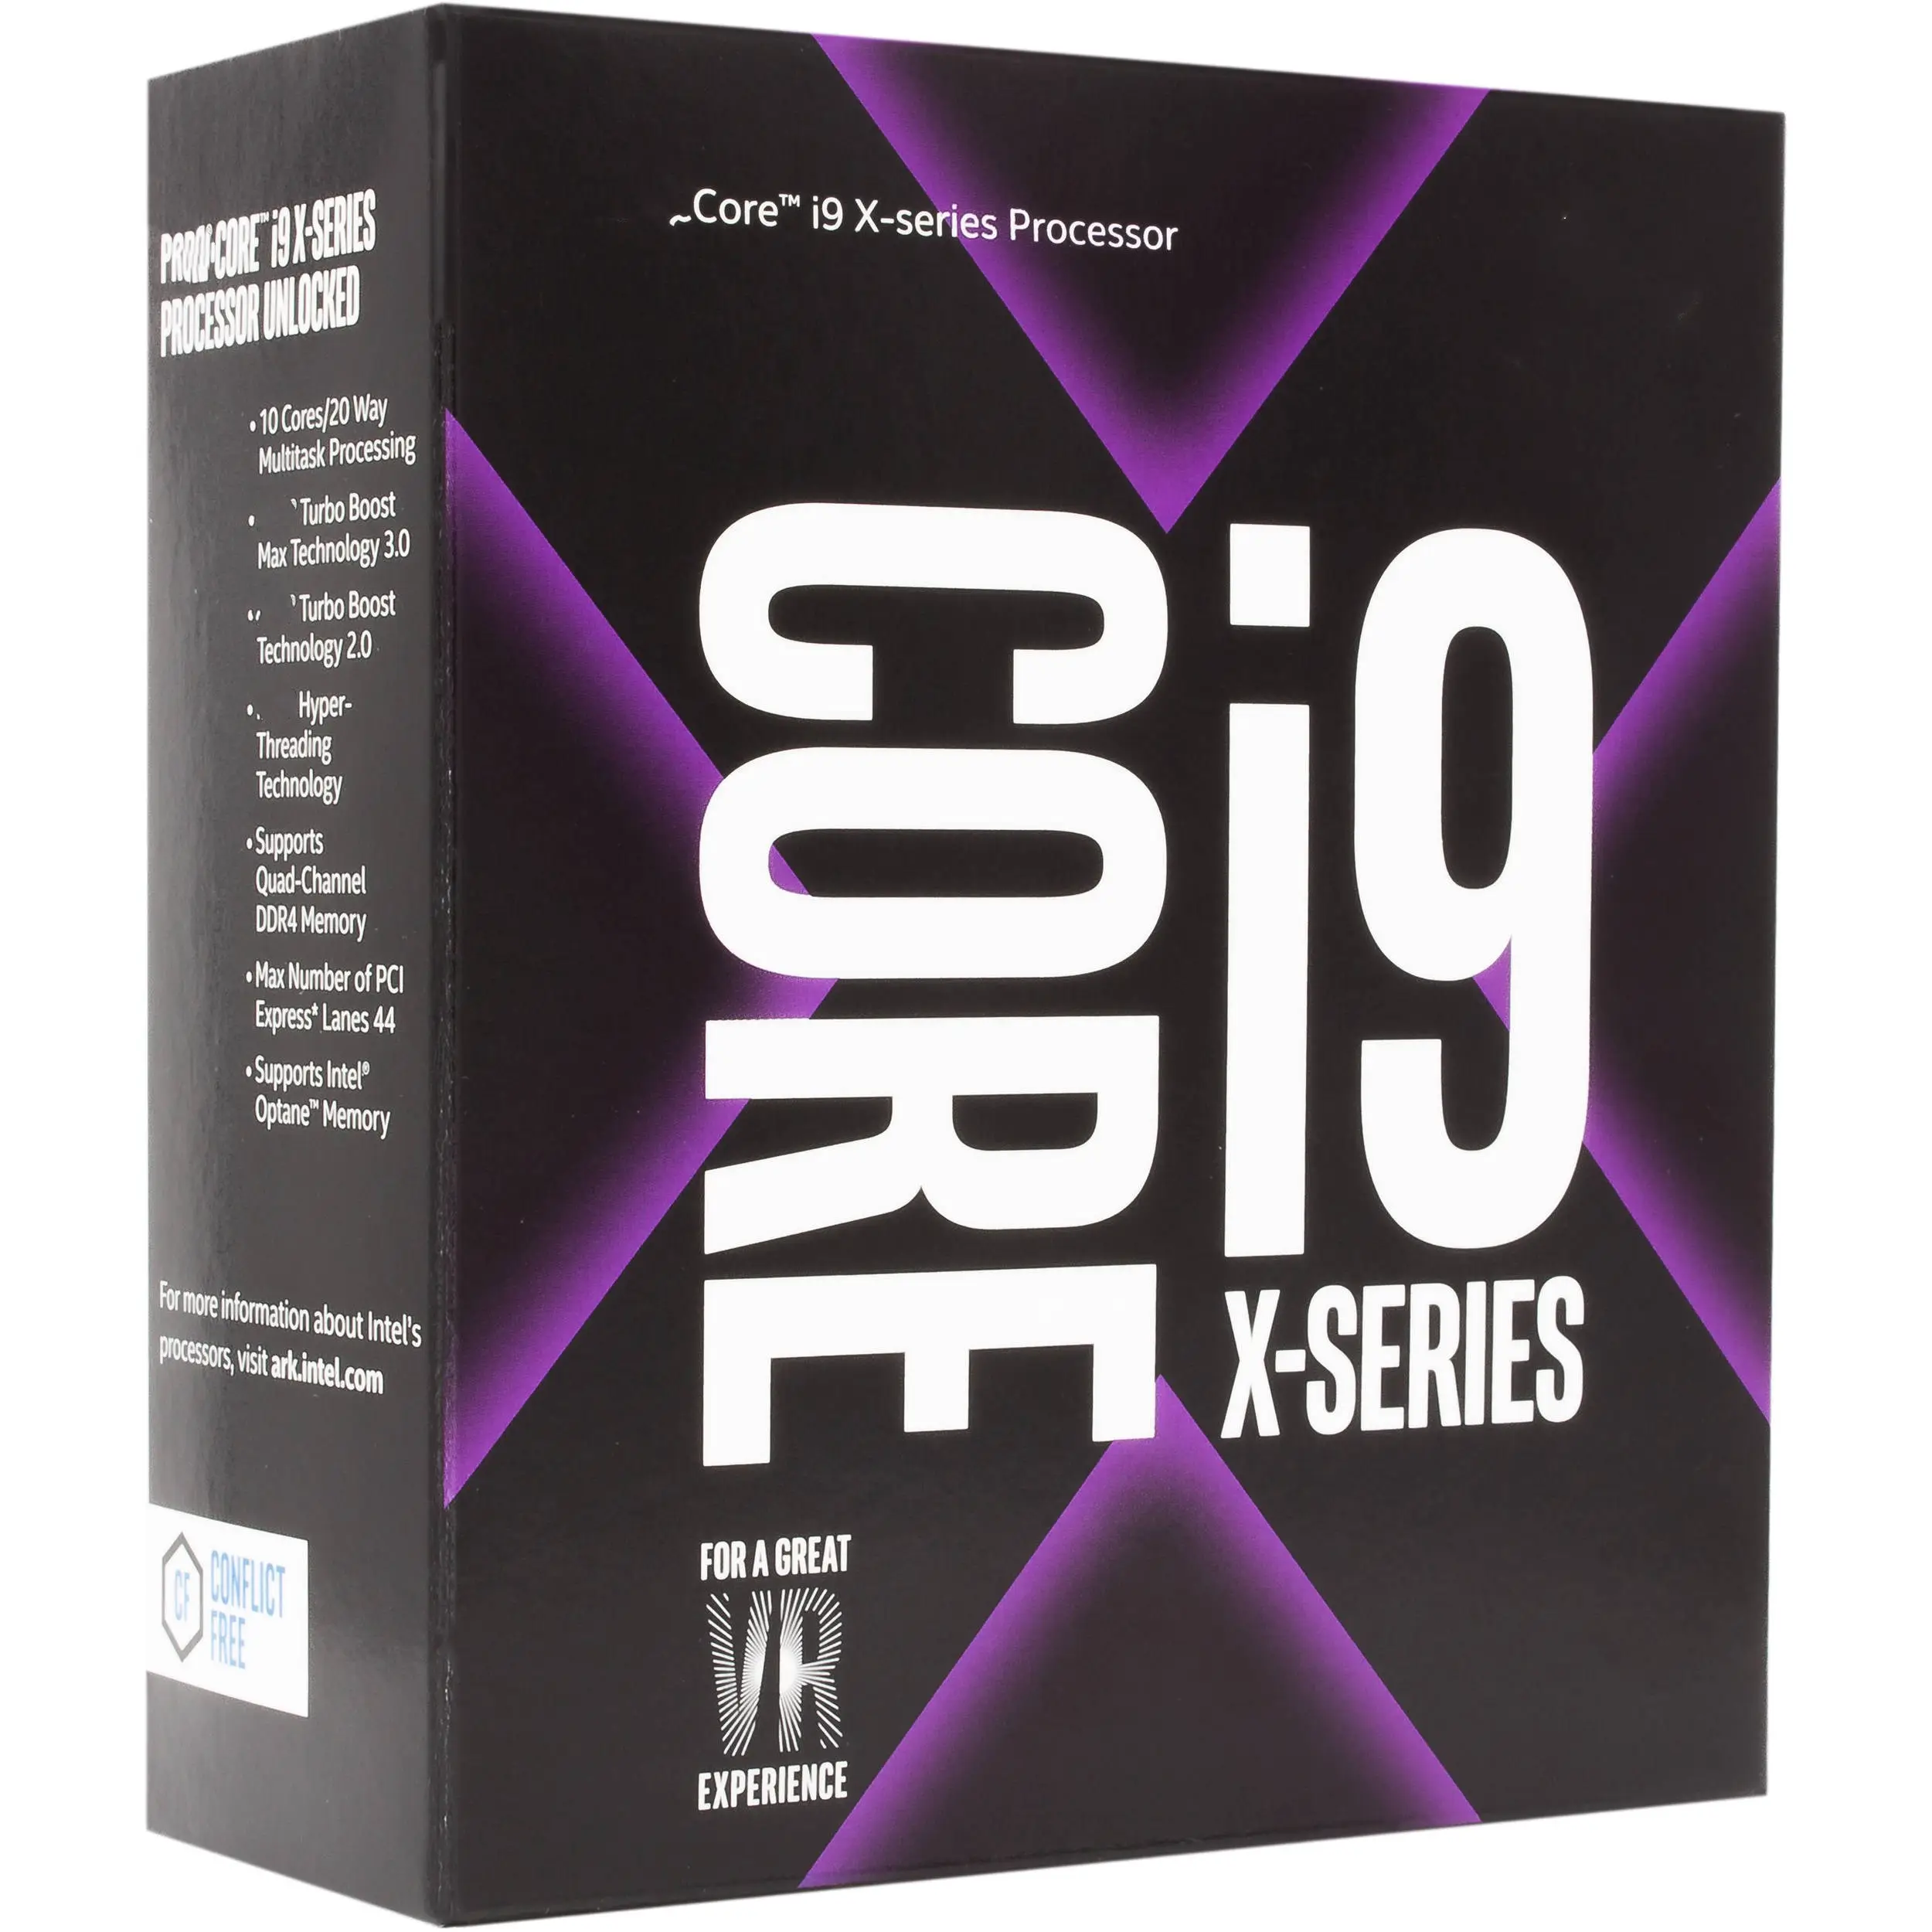 CD8069504381800S RGSG CPU - Central Processing Units i9-10980XE Extreme Edition Processor (24.75M Cache, 3.00 GHz) FC